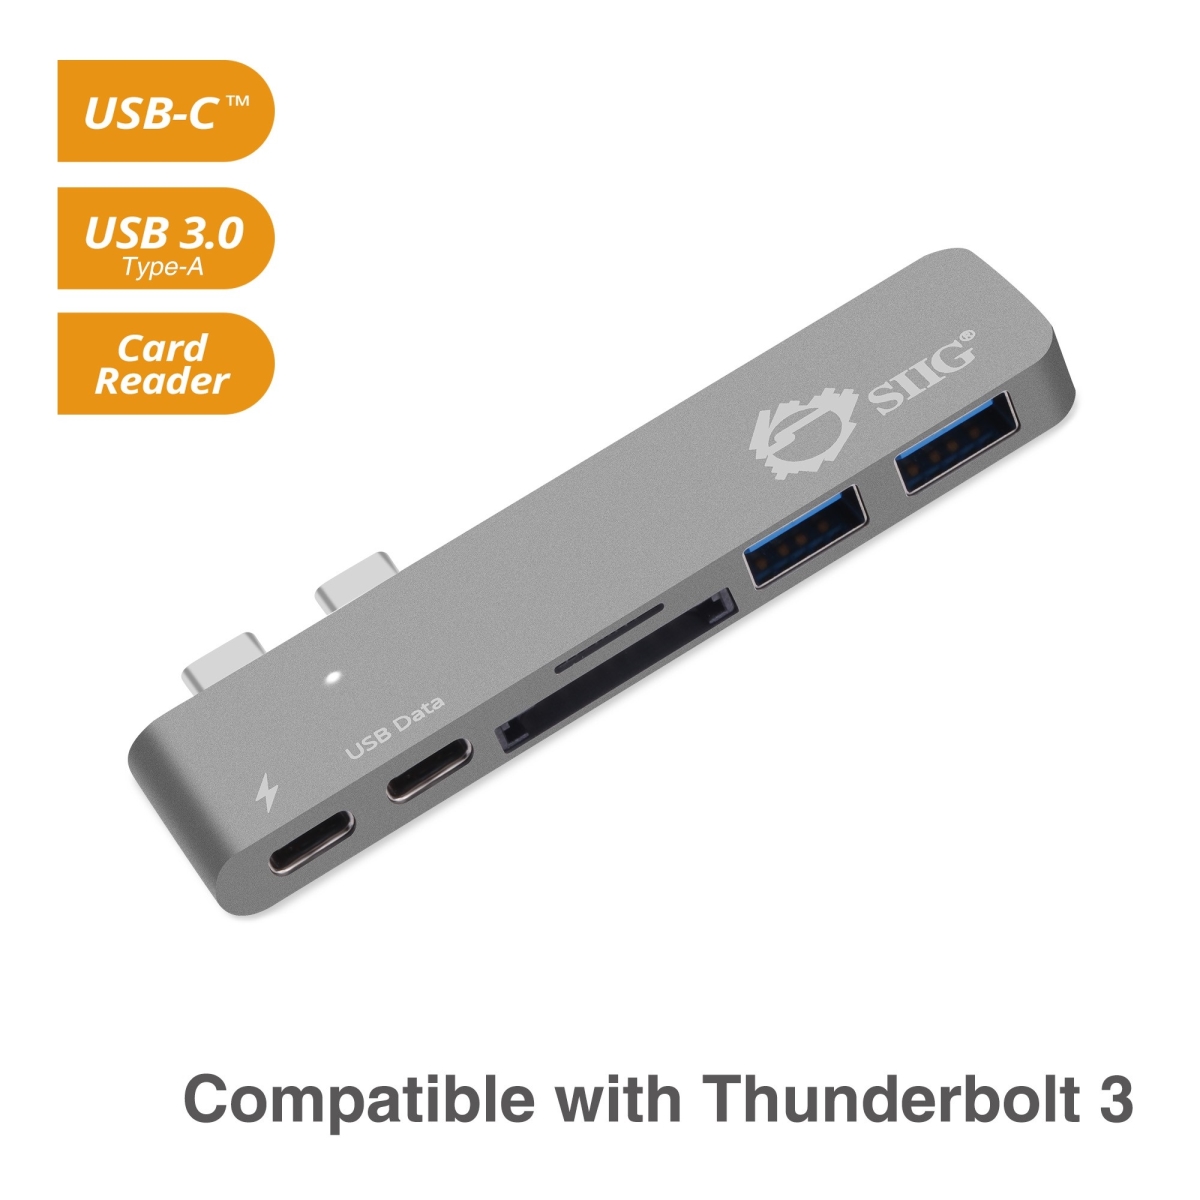 Picture of SIIG JU-TB0312-S1 Thunderbolt 3 USB-C Hub with Card Reader & PD Adapter - Space Gray